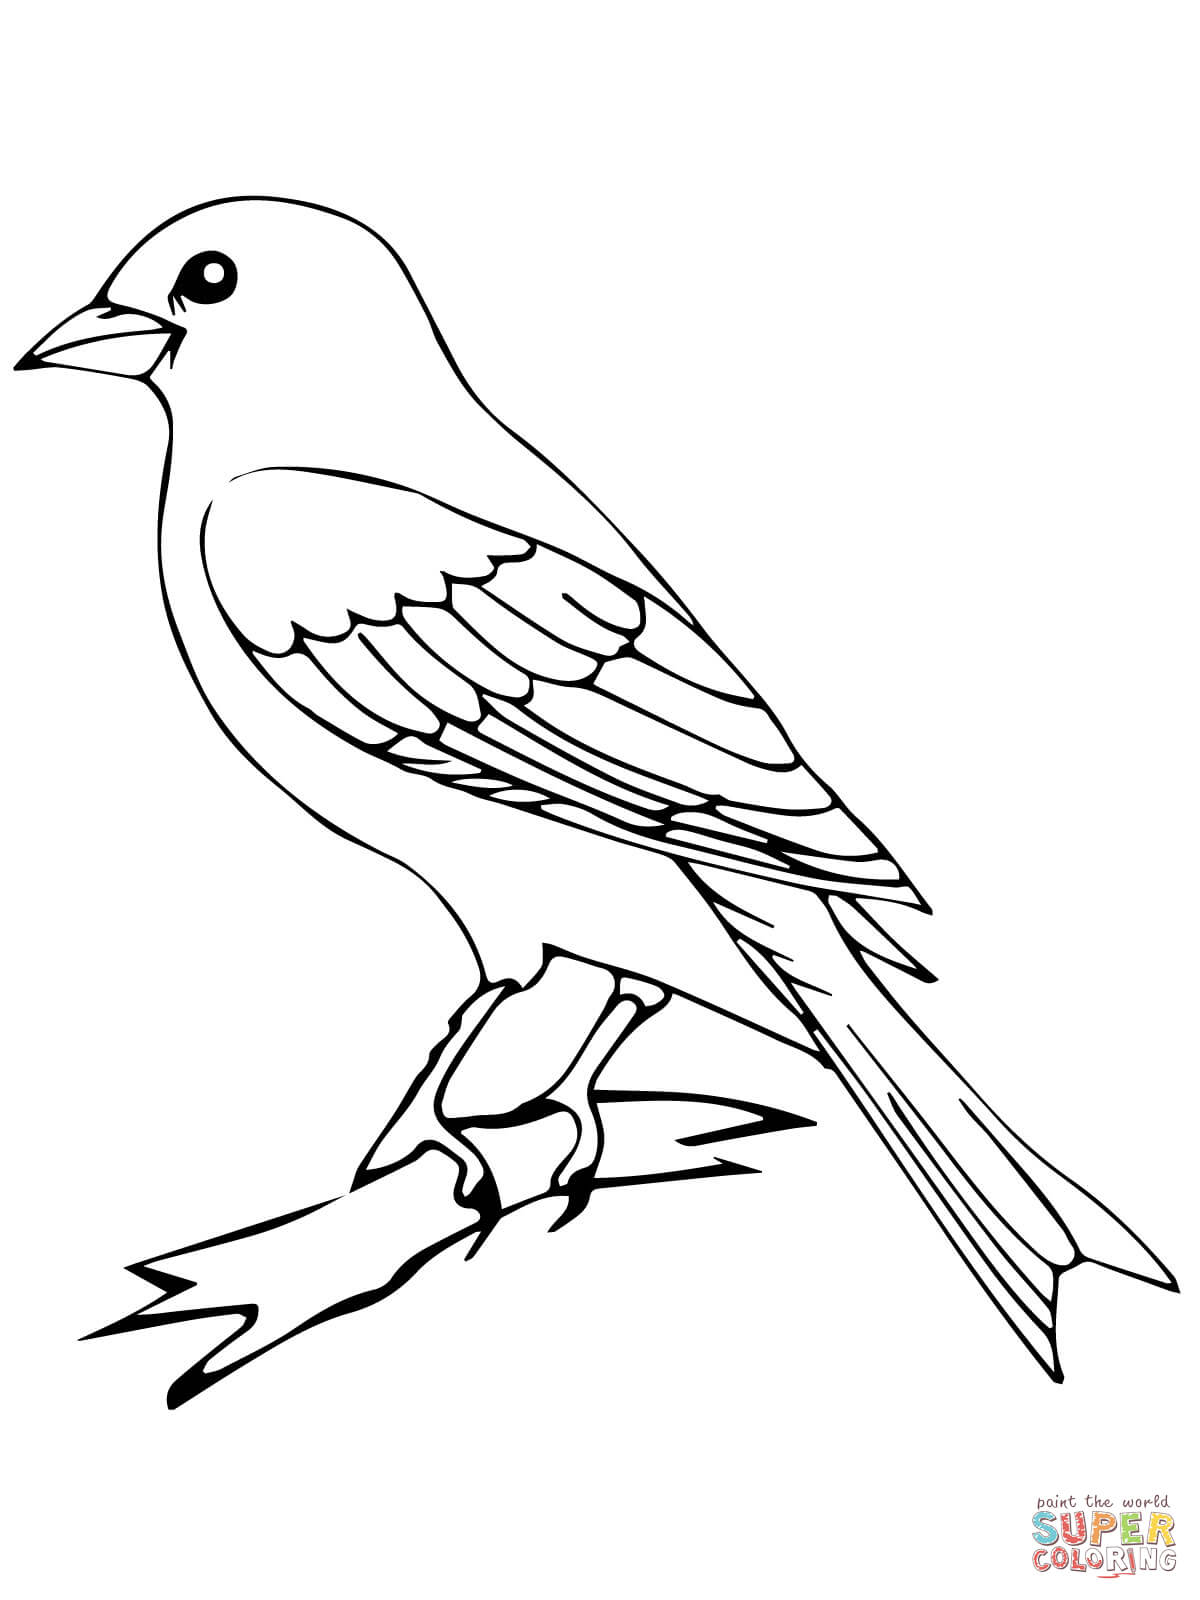 Bird Color Pages Perched Canary Bird Coloring Page Free Printable Coloring Pages